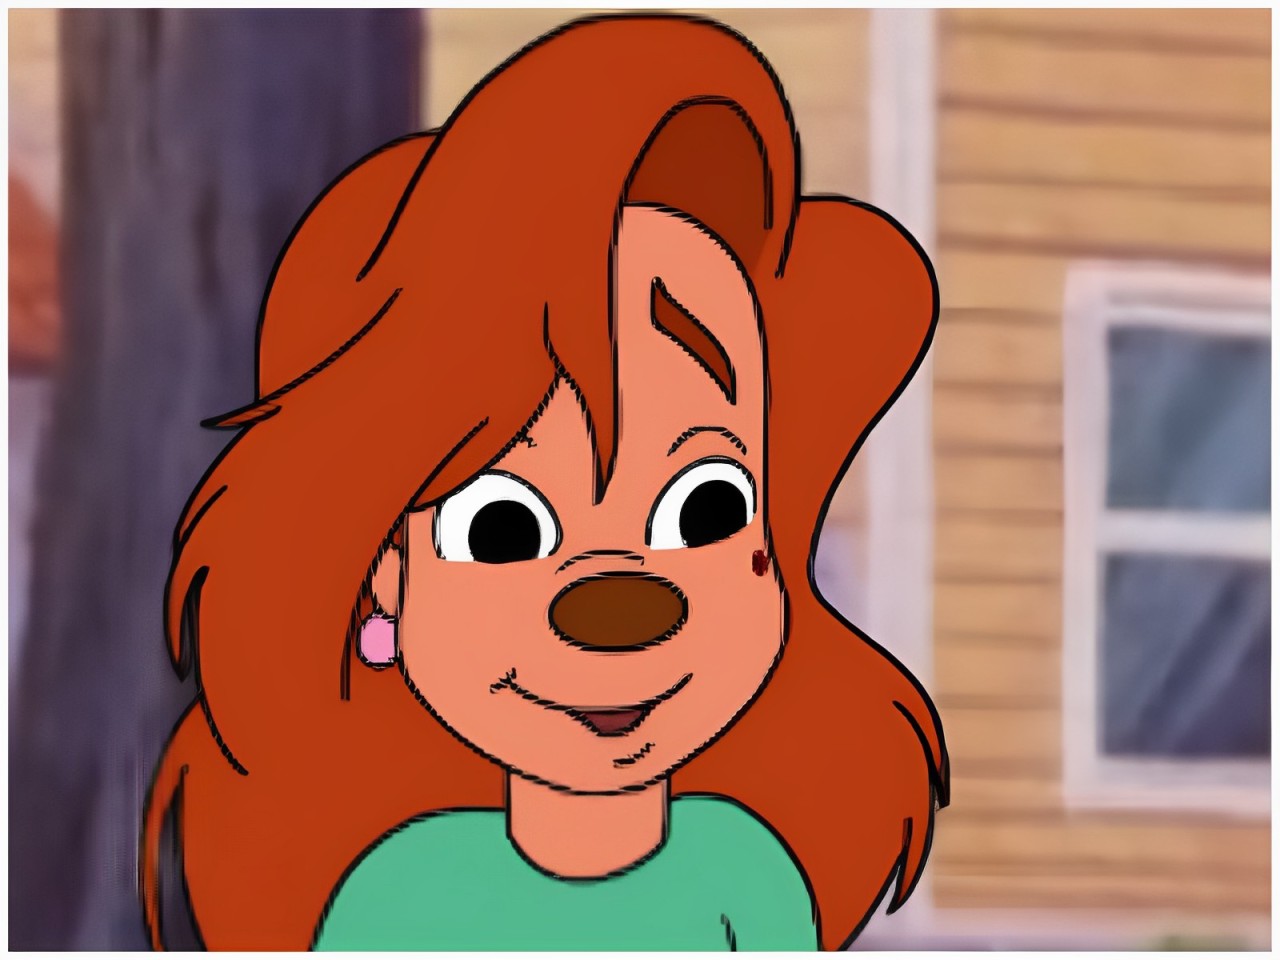 Roxanne from the animated film A Goofy Movie